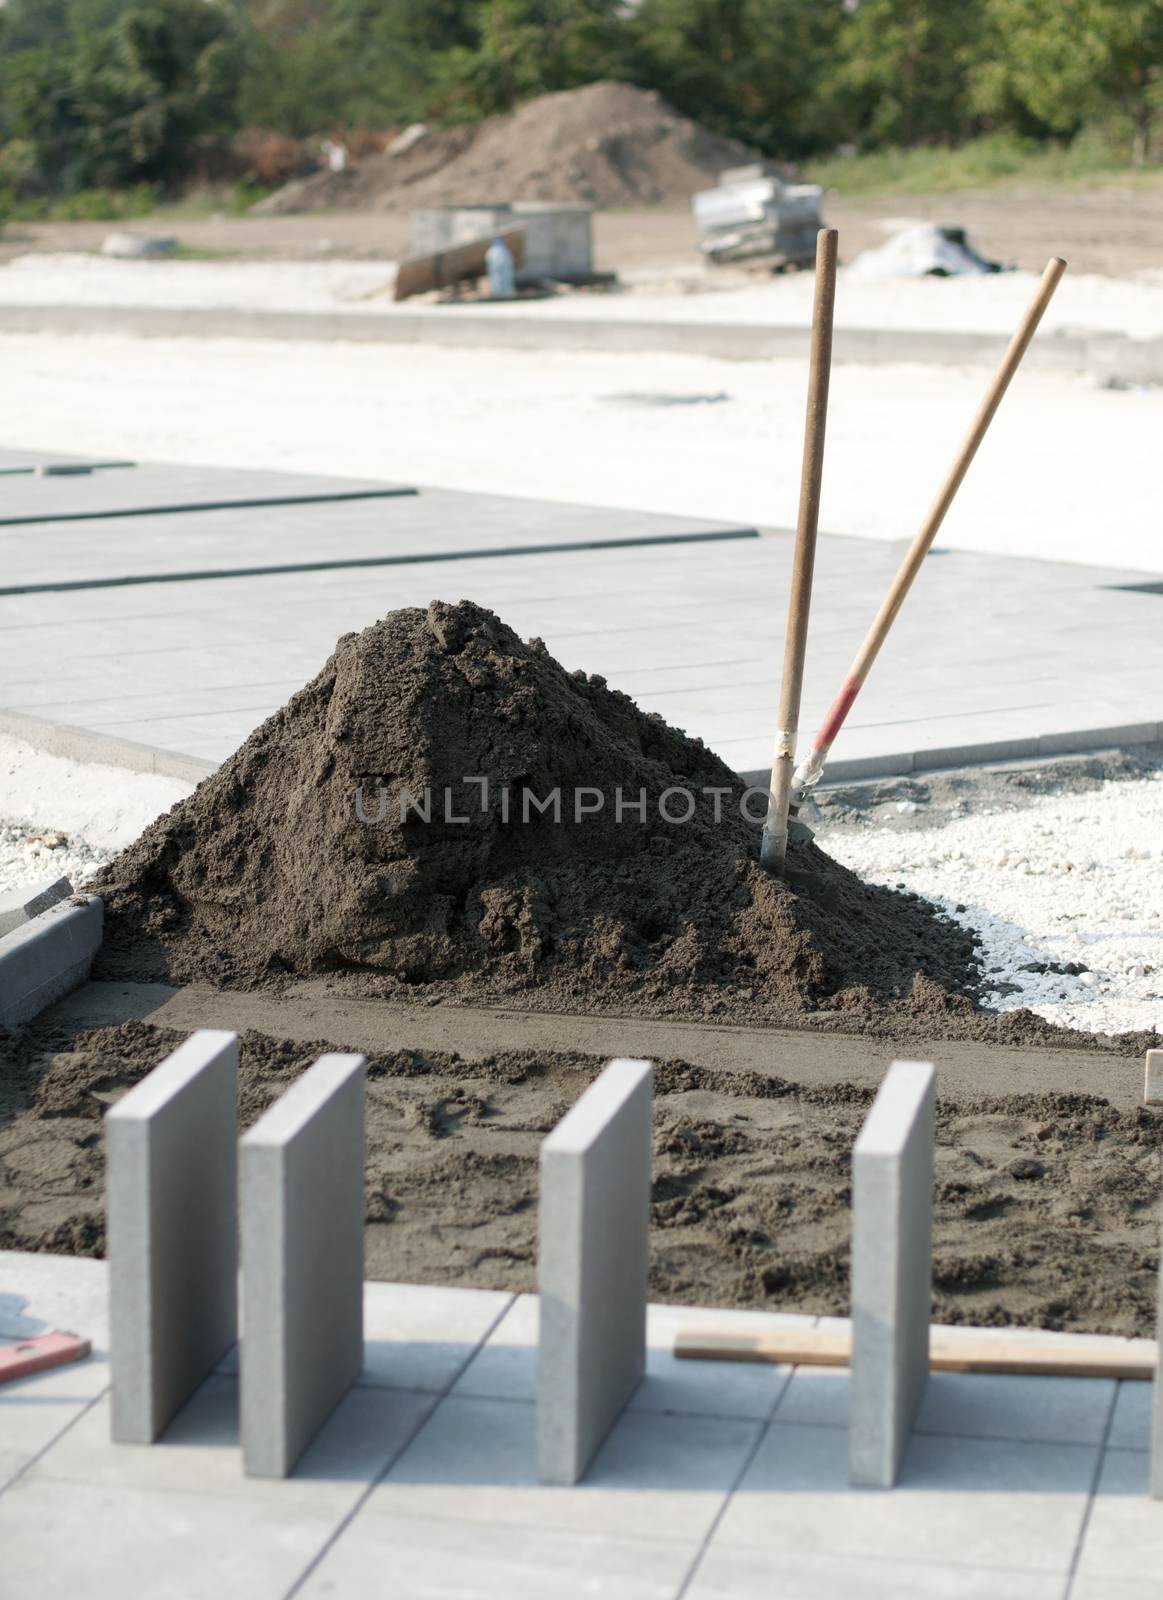 Tiling of pavement and sand pile by deyan_georgiev